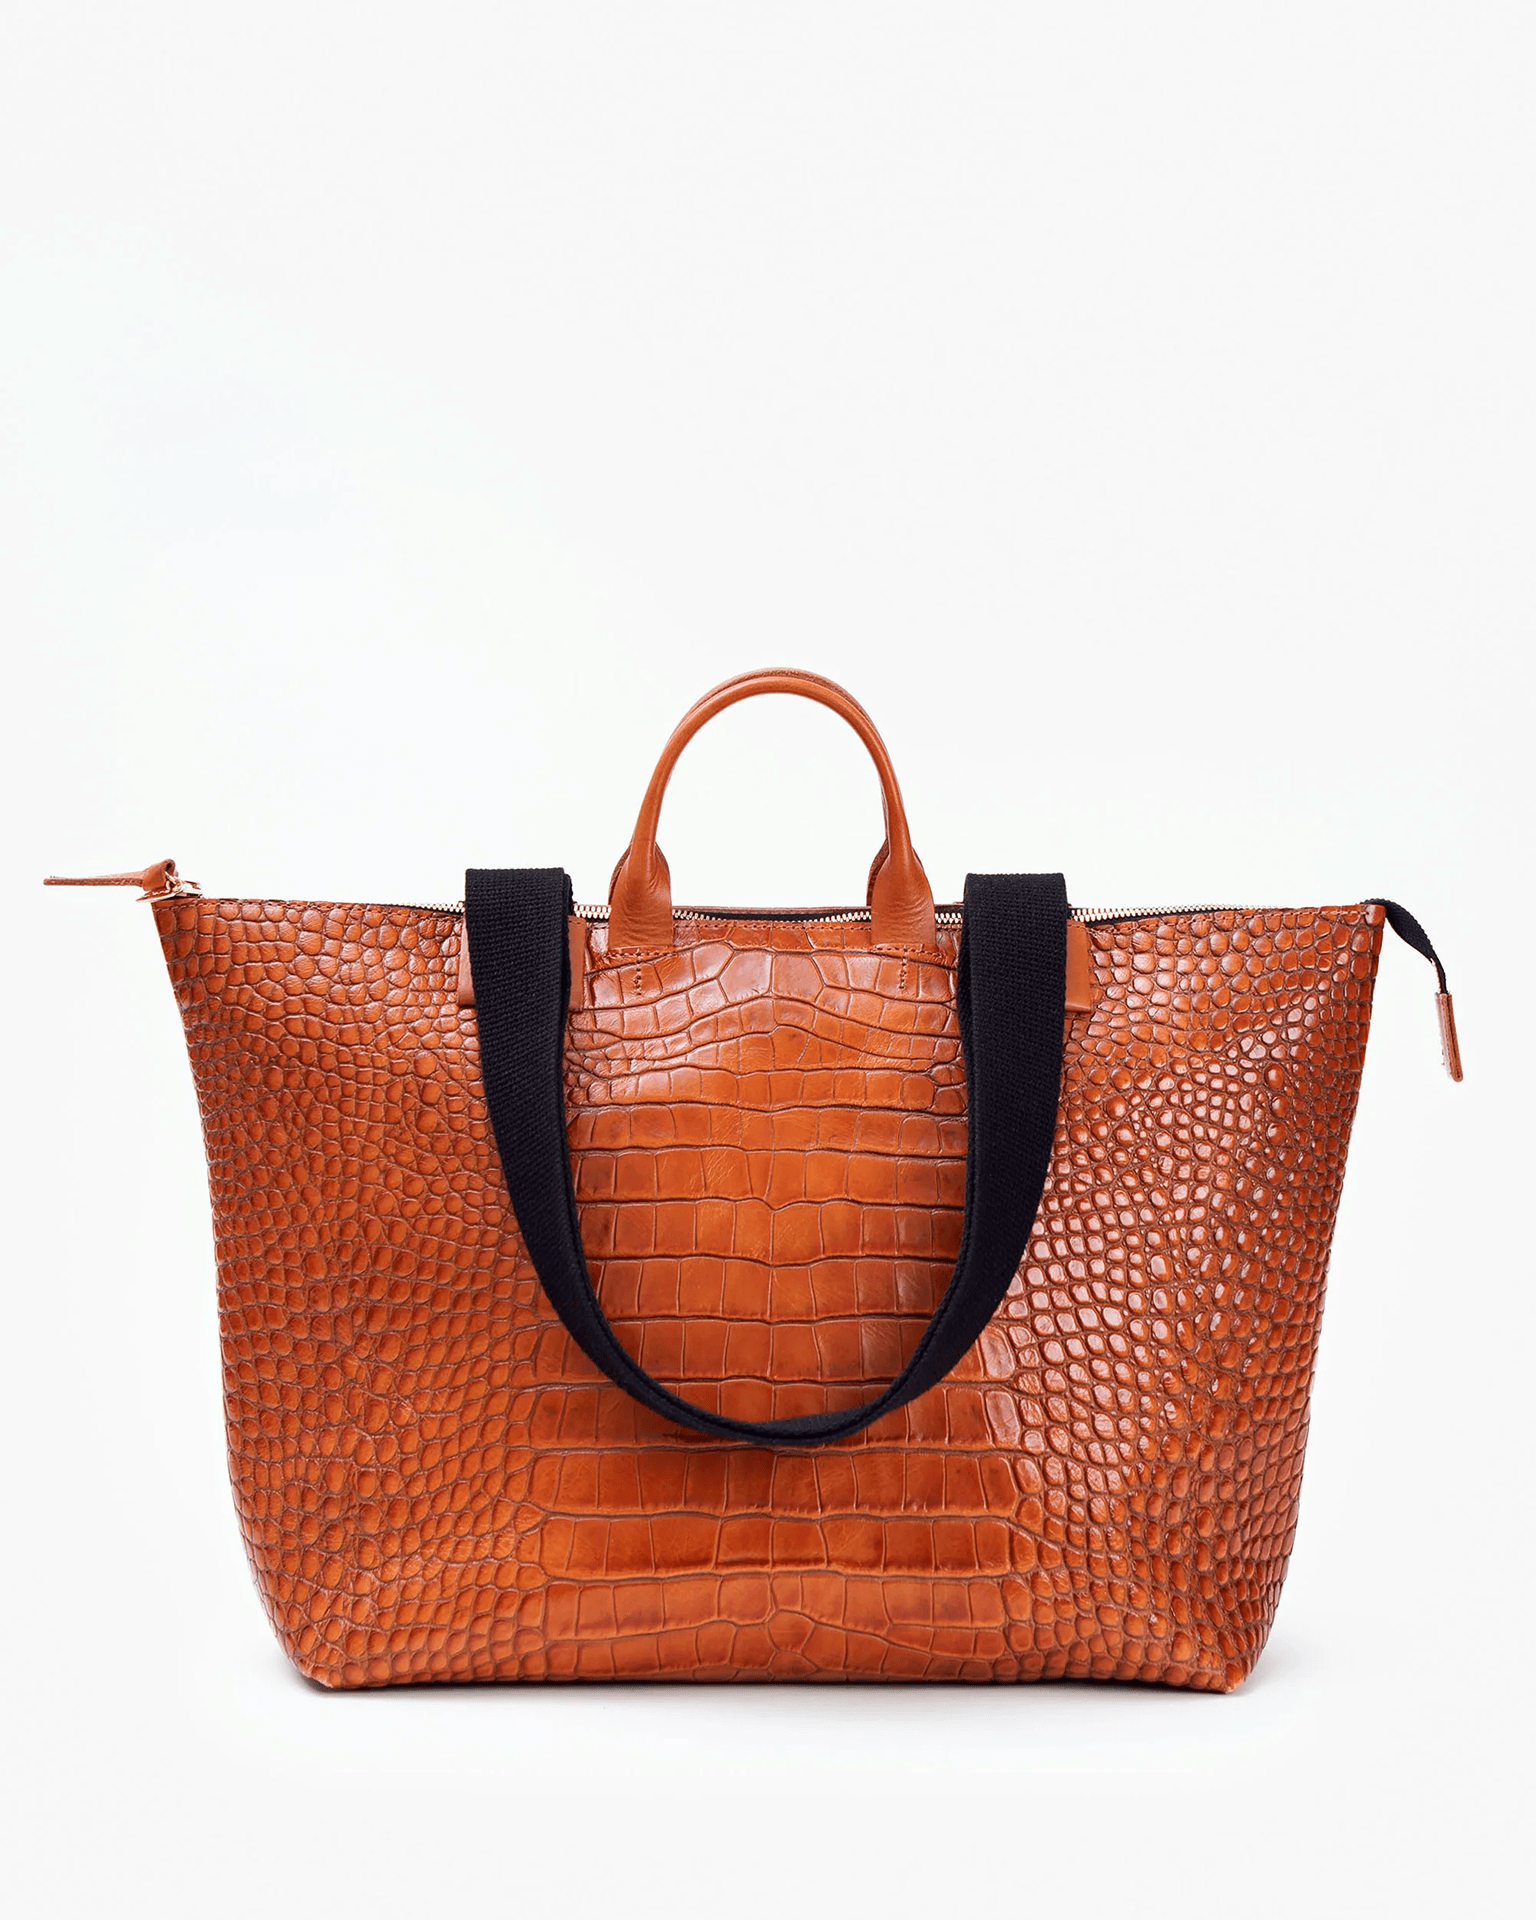 Clare V. Autumn Croco Le Zip Sac in Cuoio - Bliss Boutiques